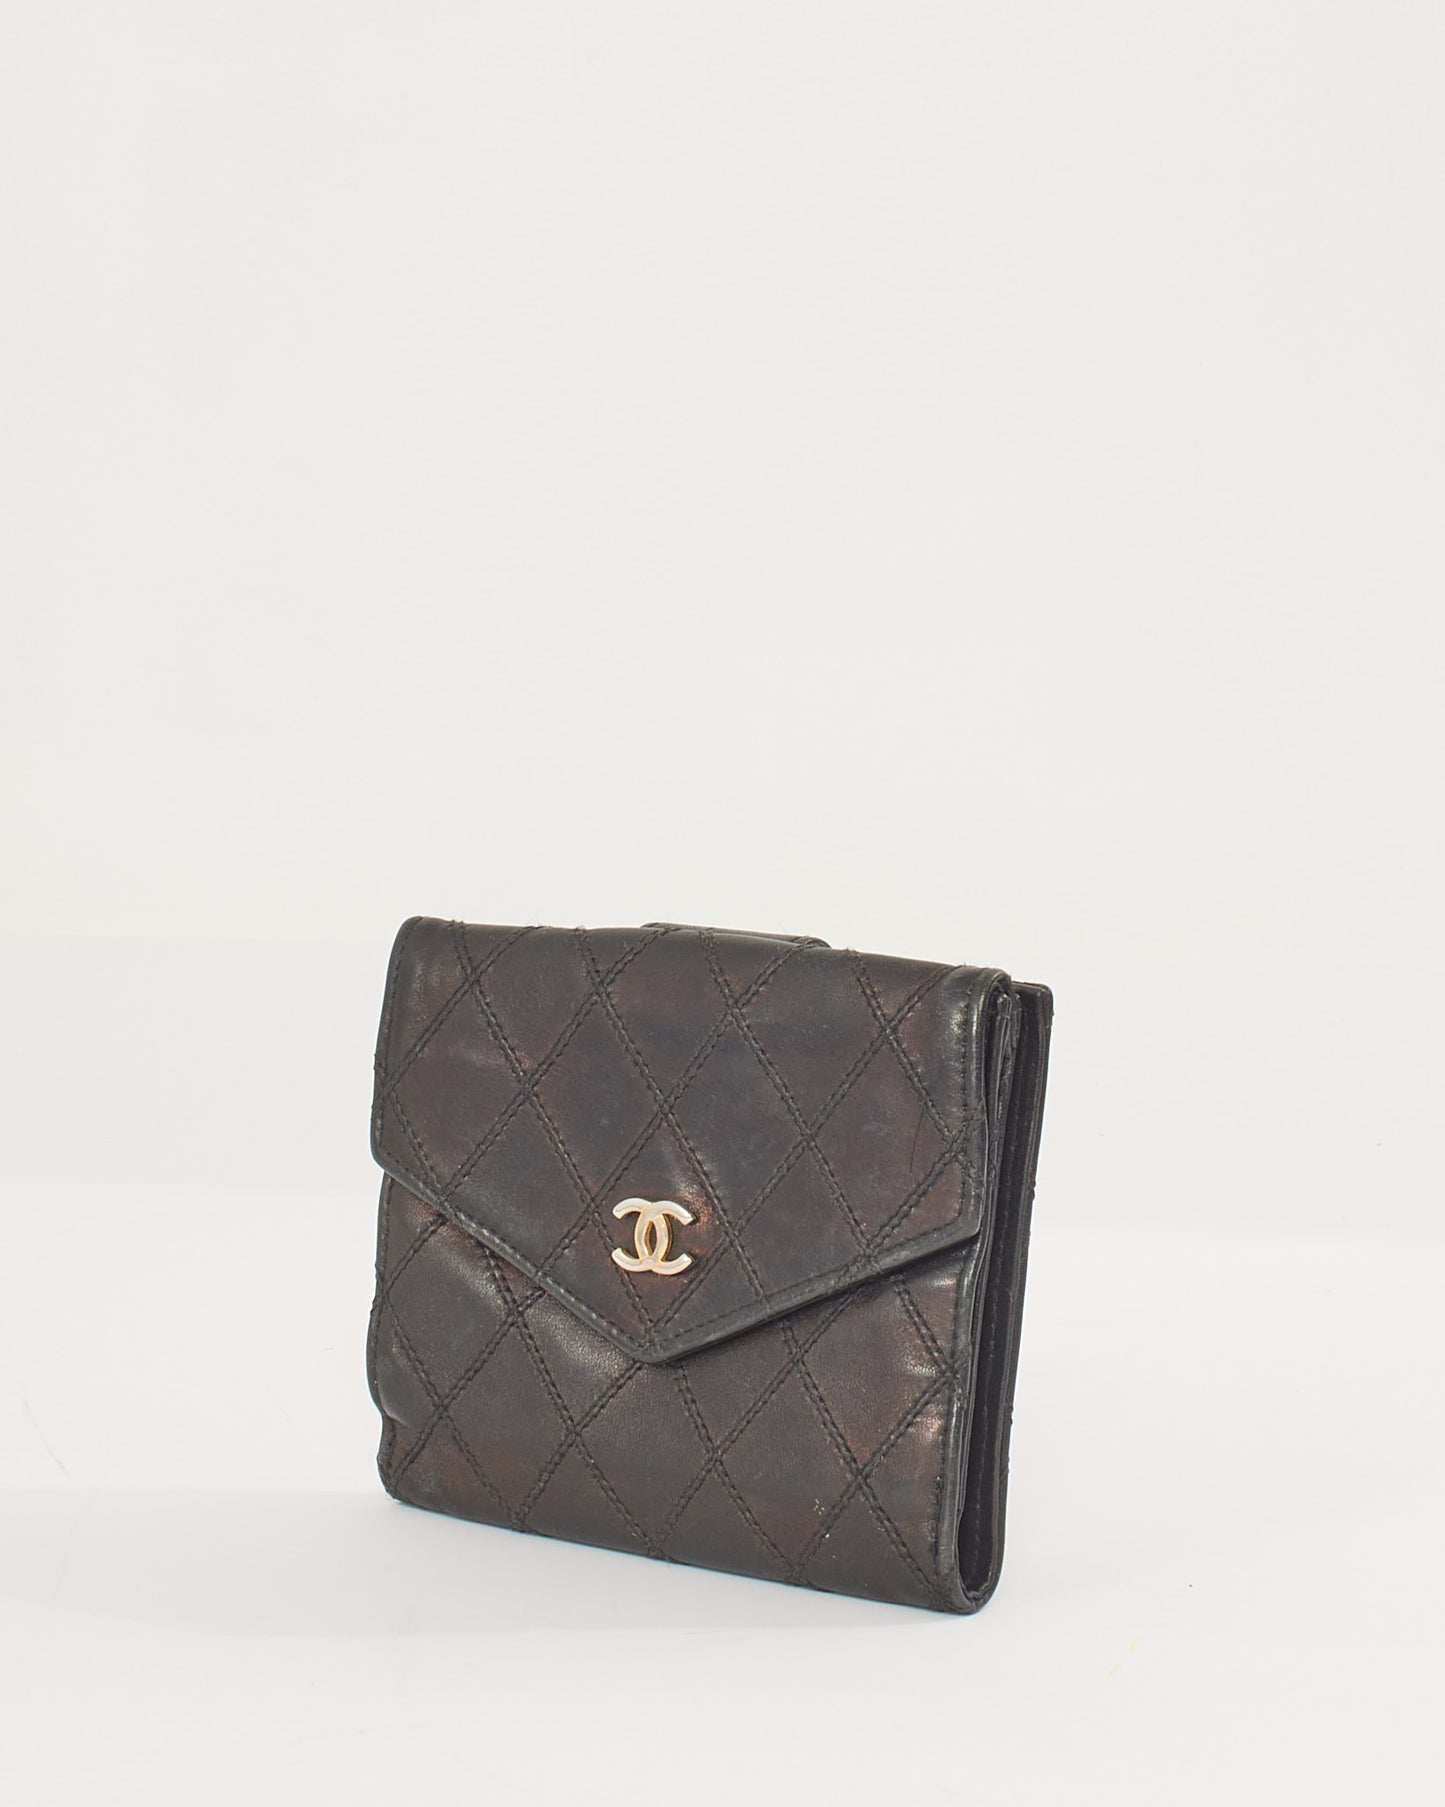 Chanel Black Lambskin Leather Square Wallet